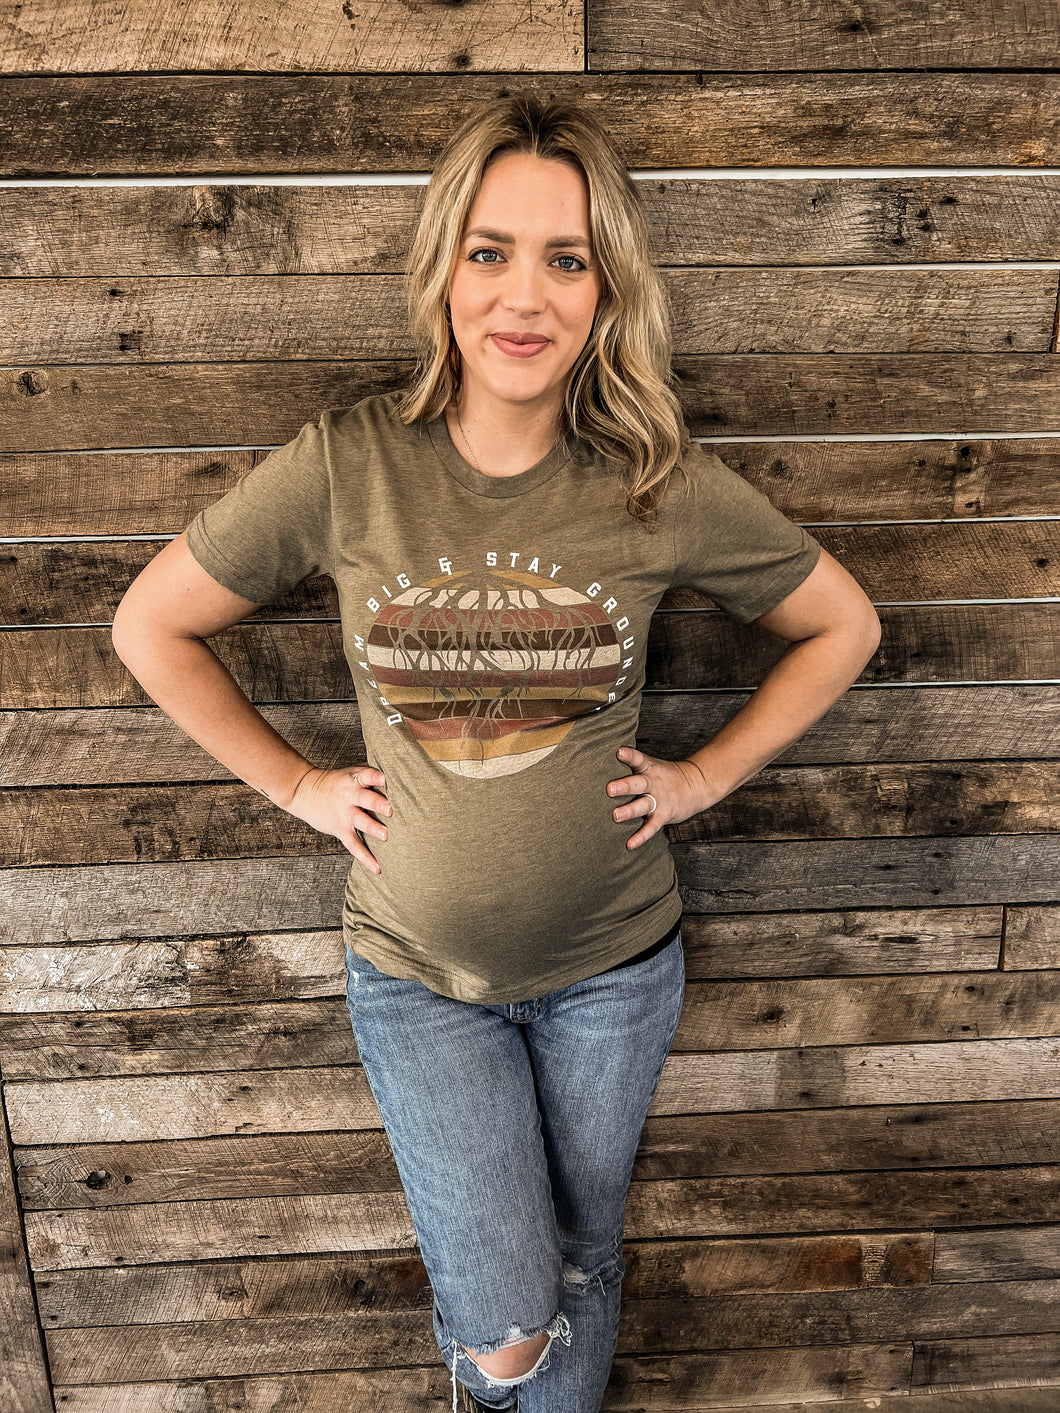 Dream Big & Stay Grounded- Tee